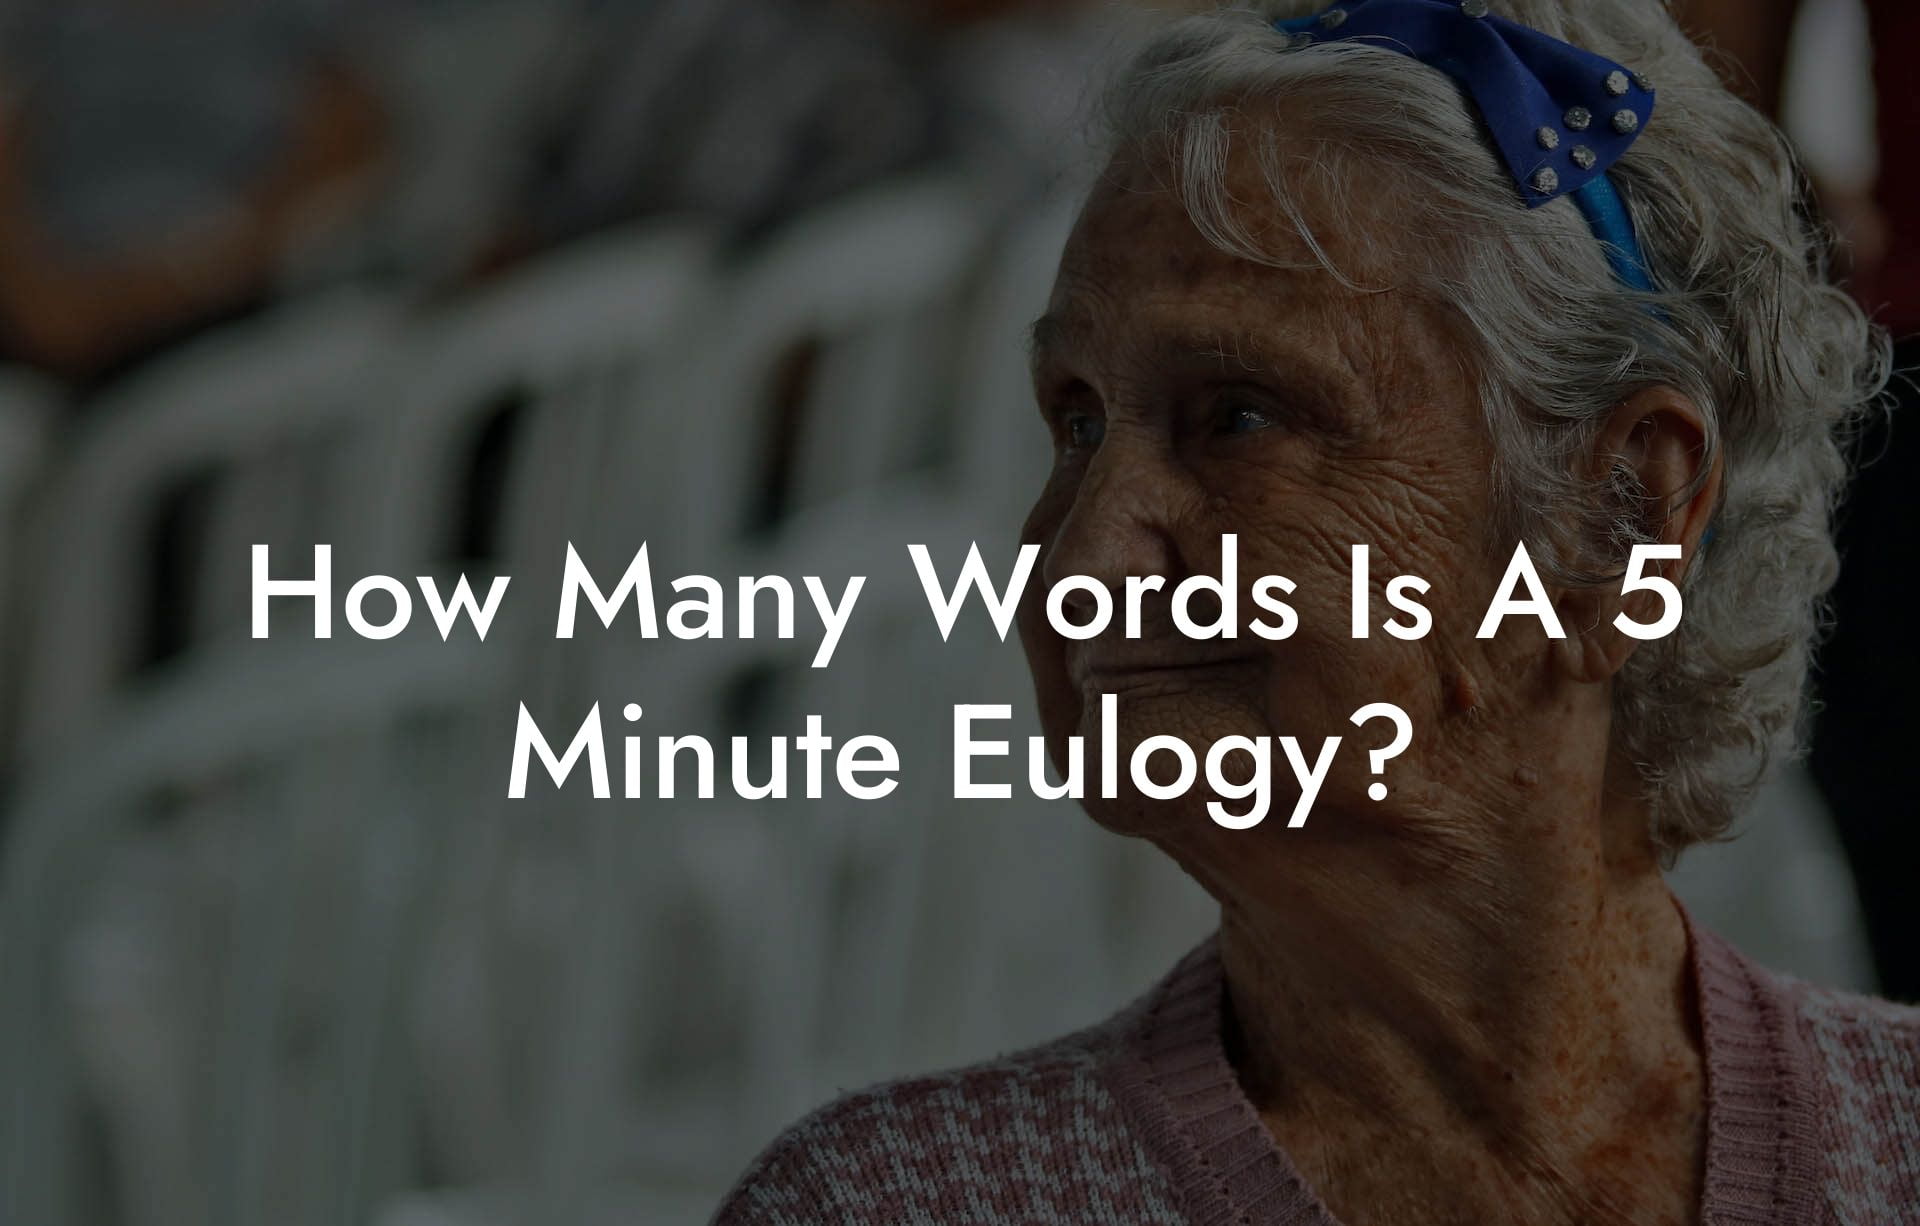 How Many Words Is A 5 Minute Eulogy?